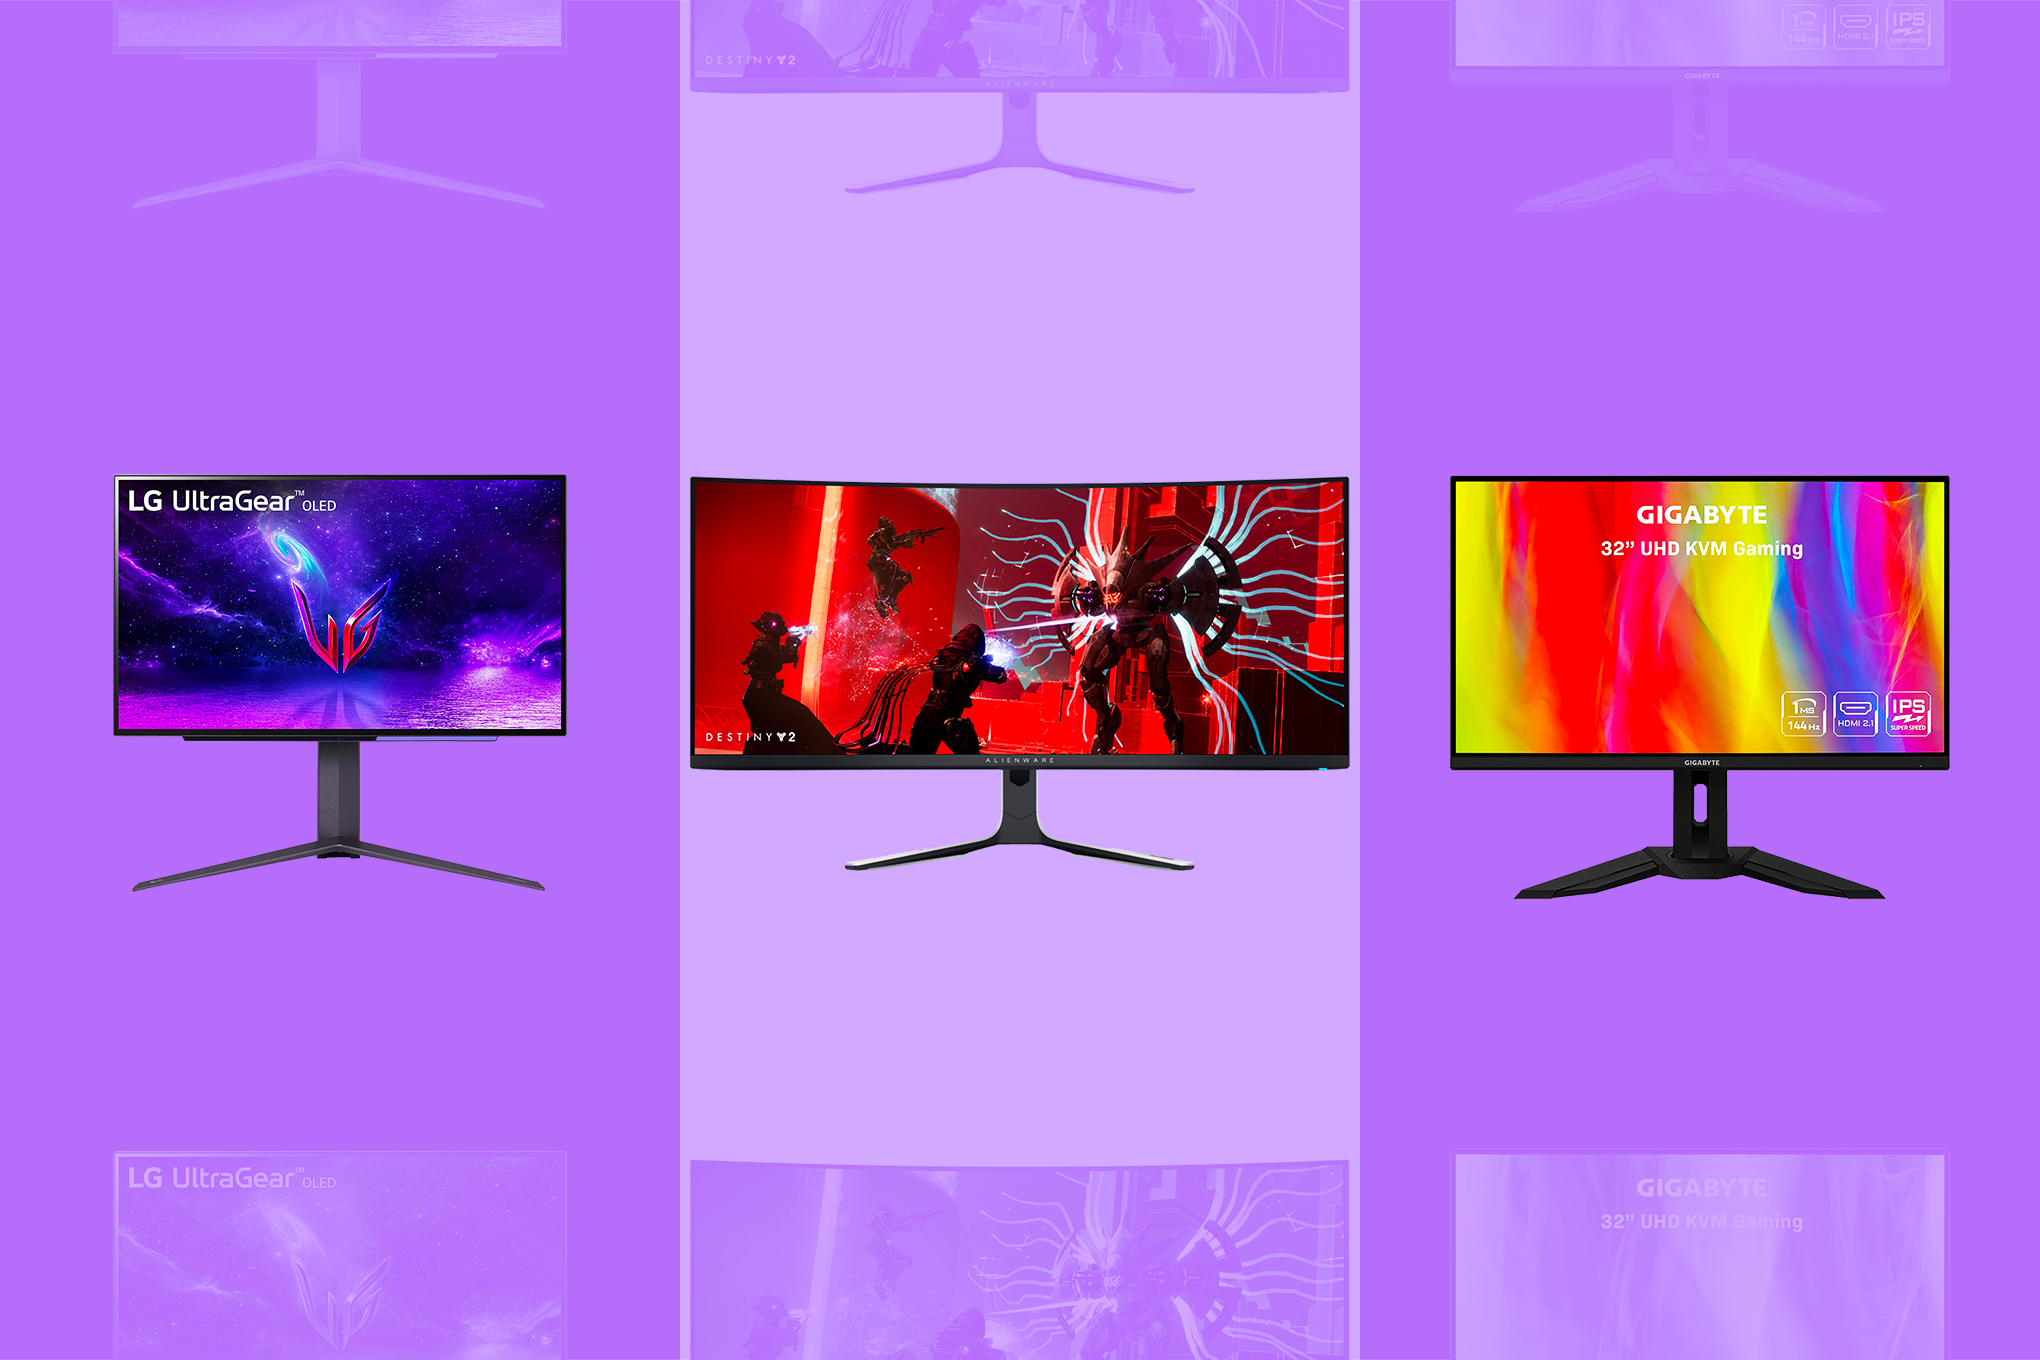 A graphic containing three gaming monitors arranged side to side, including the LG 27-inch UltraGear OLED, the Alienware AW3423DW curved 34-inch gaming monitor, and the Gigabyte M32U gaming monitor